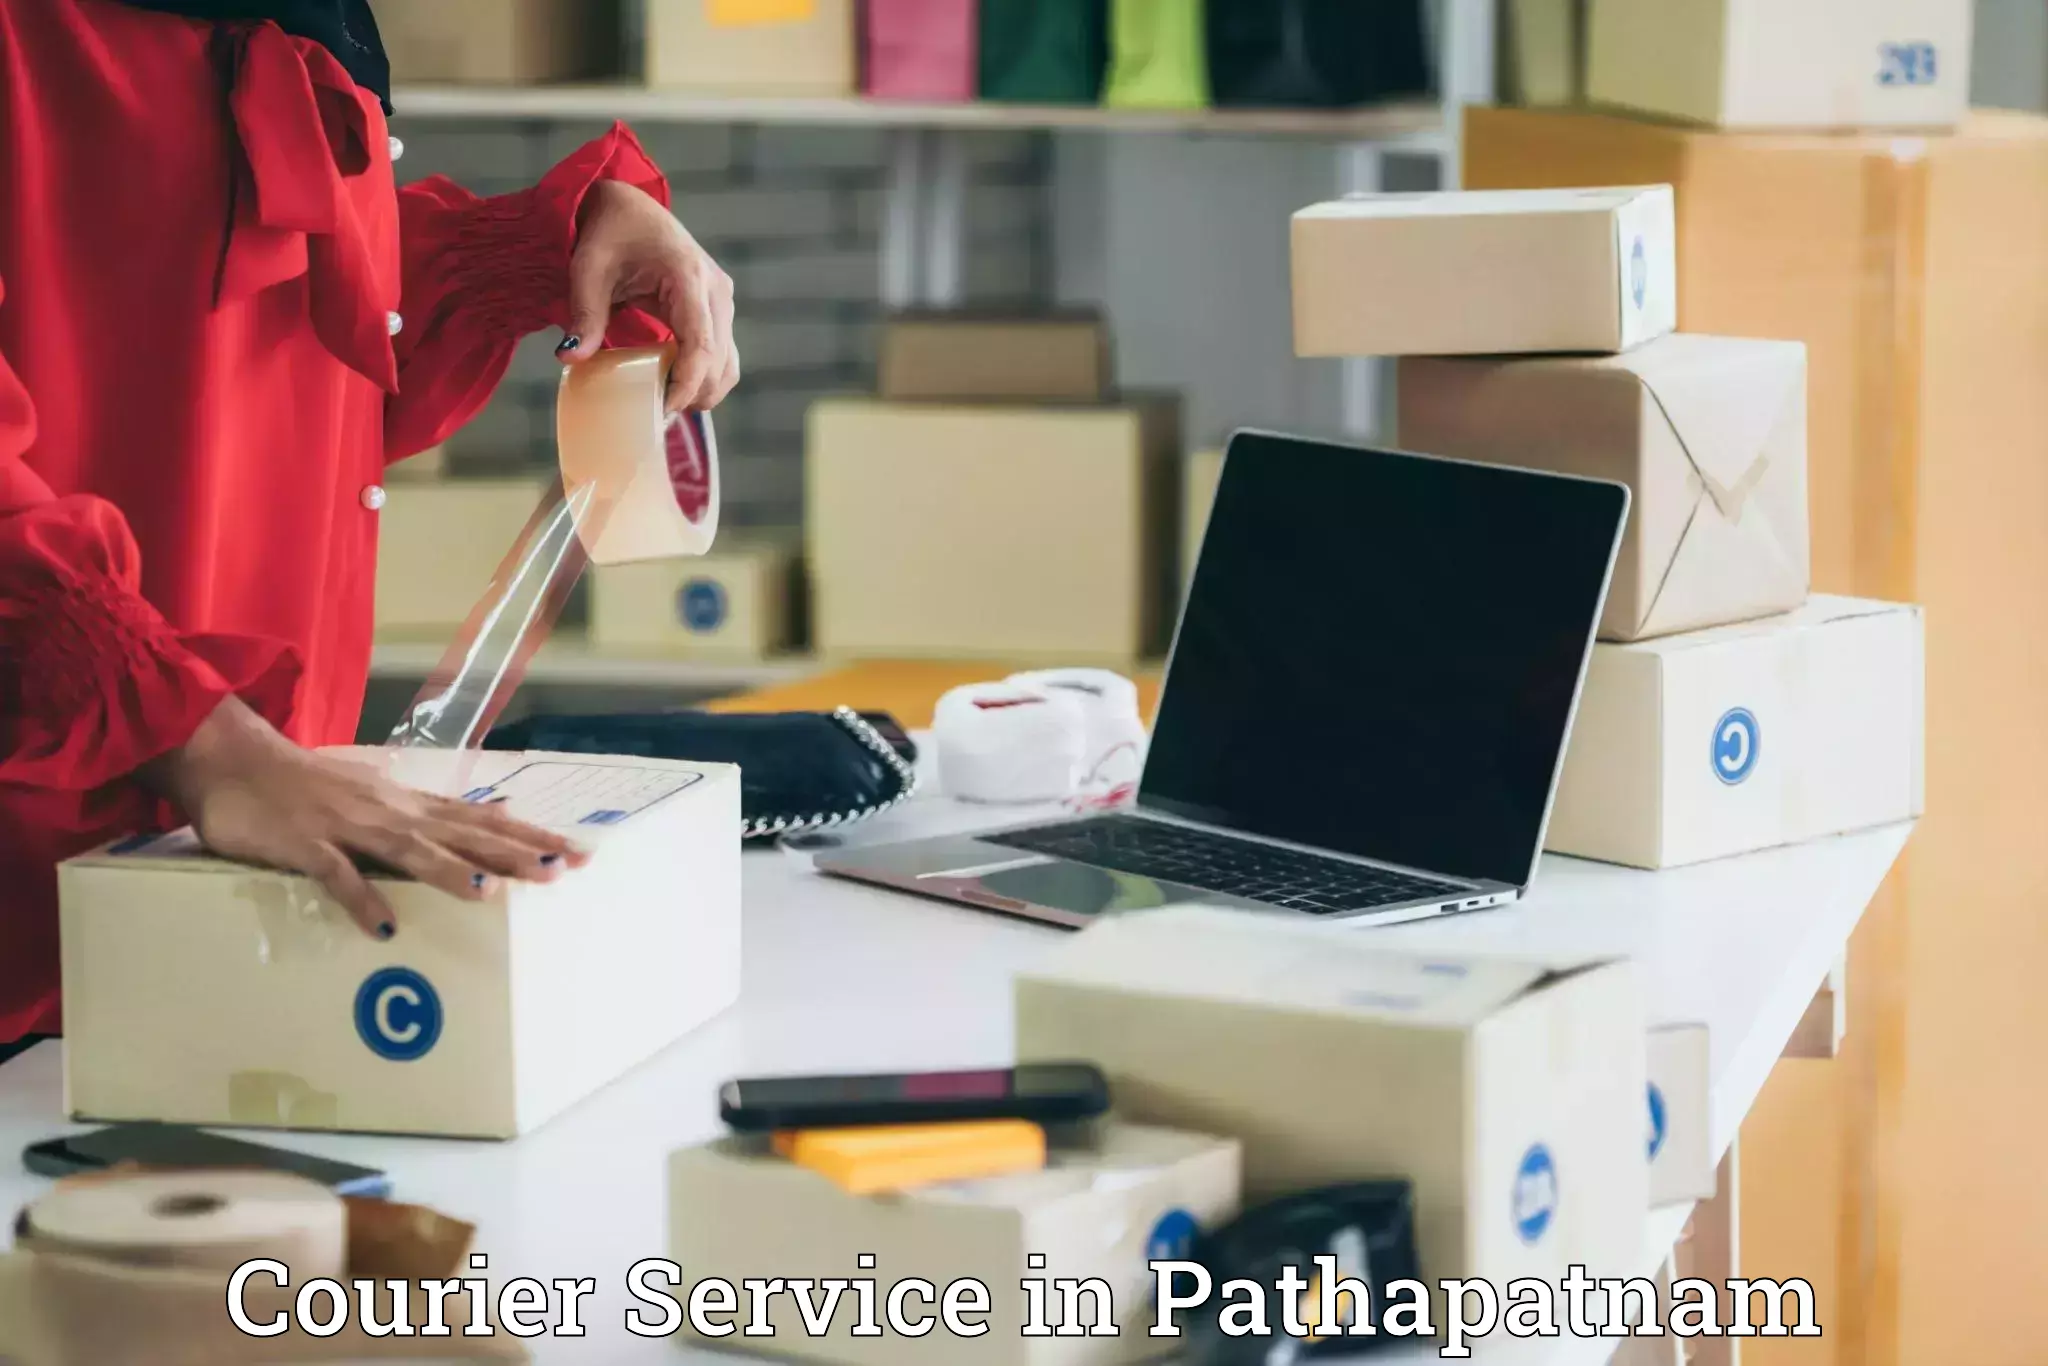 Efficient parcel delivery in Pathapatnam